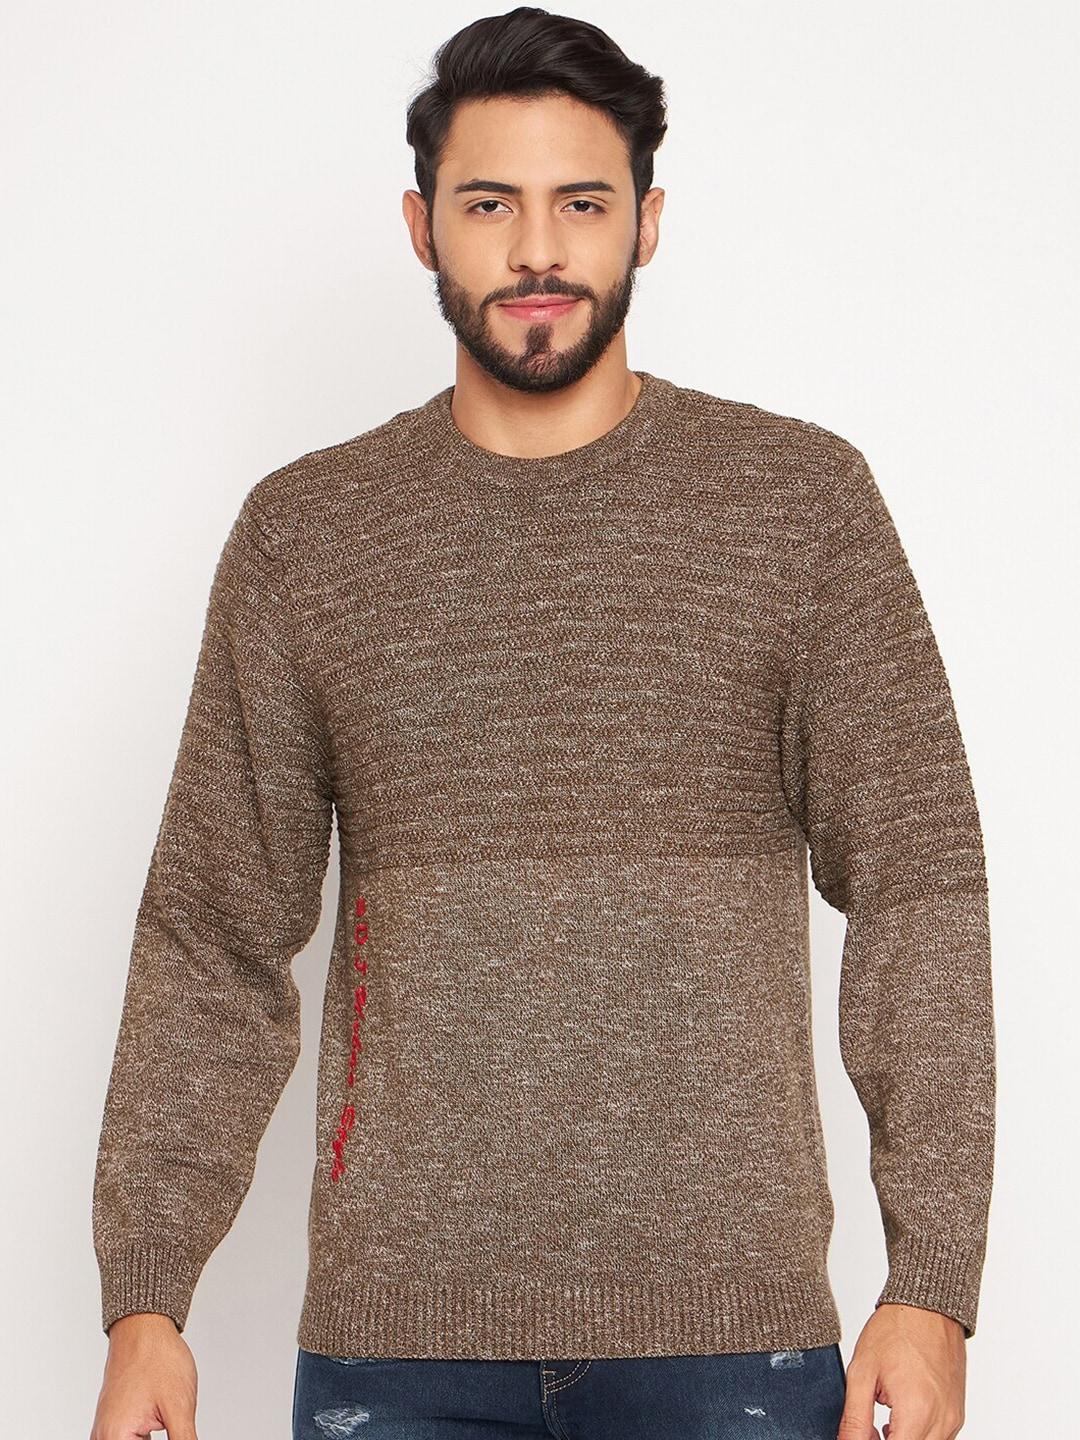 duke-round-neck-ribbed-pullover-sweater